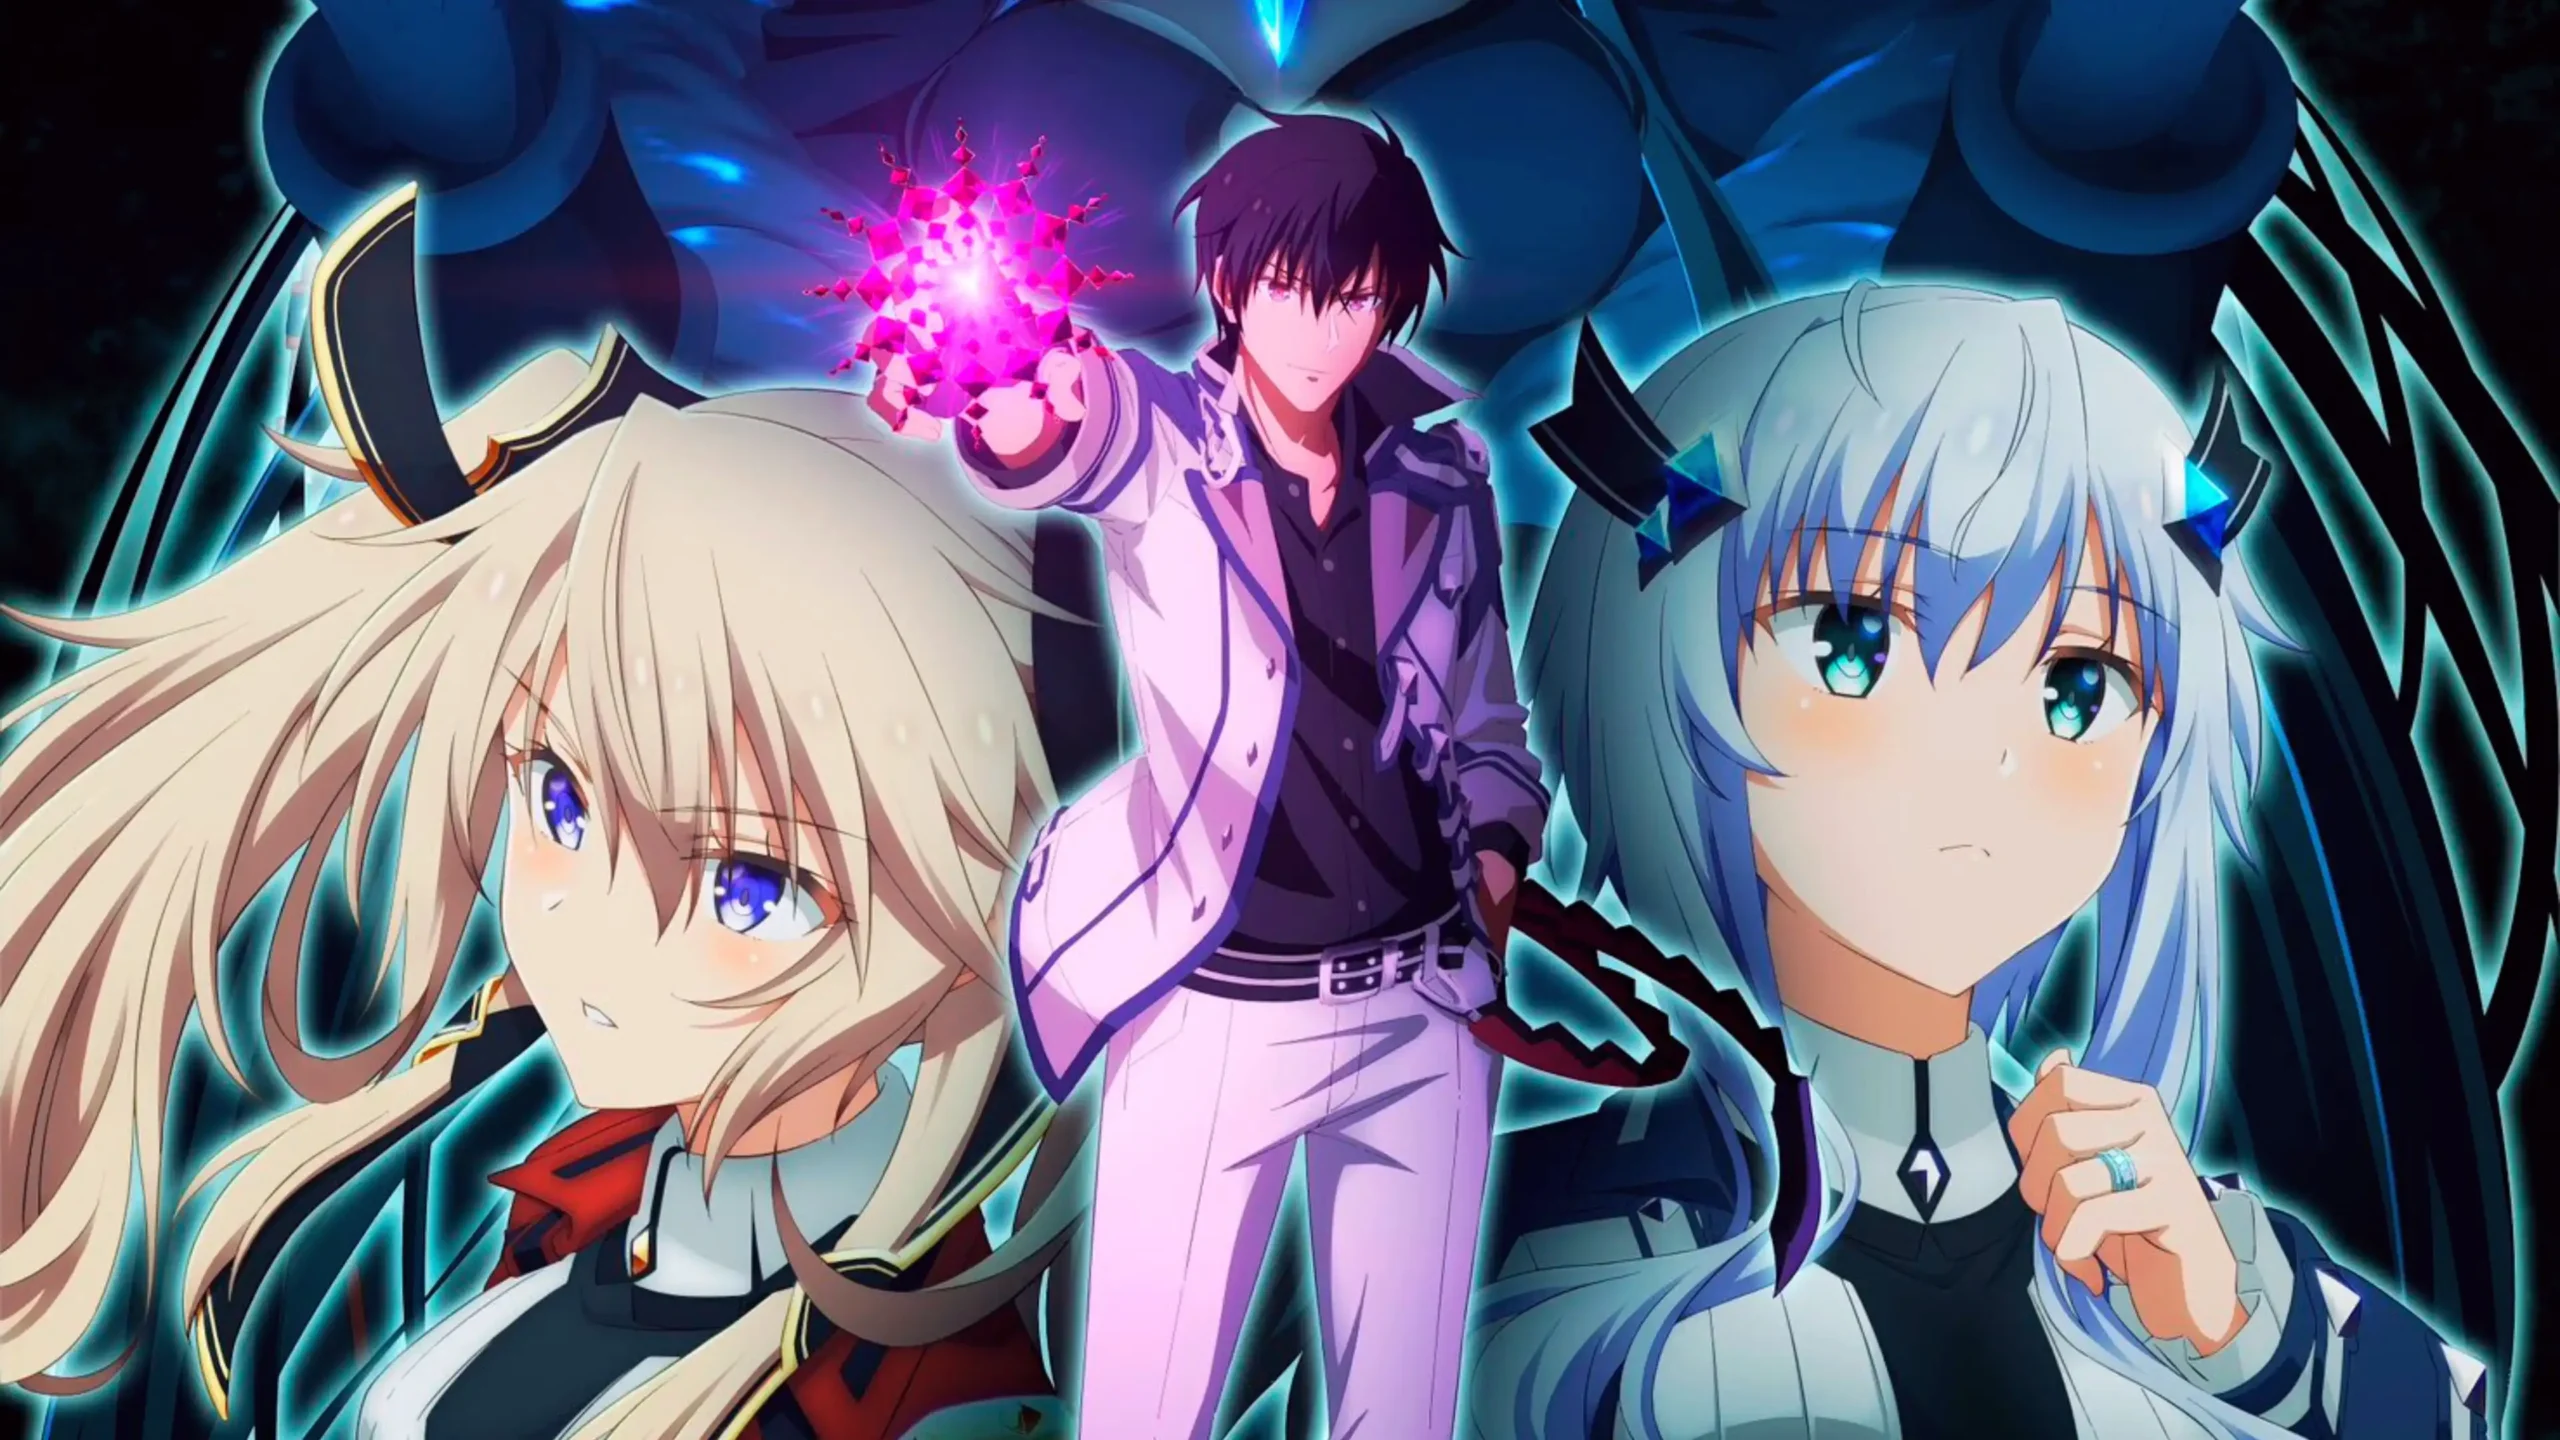 Get Ready for a Magical 2023: Anos Voldigoad is Back with 'The Misfit of Demon King Academy' Season 2—Here's Everything We Know!